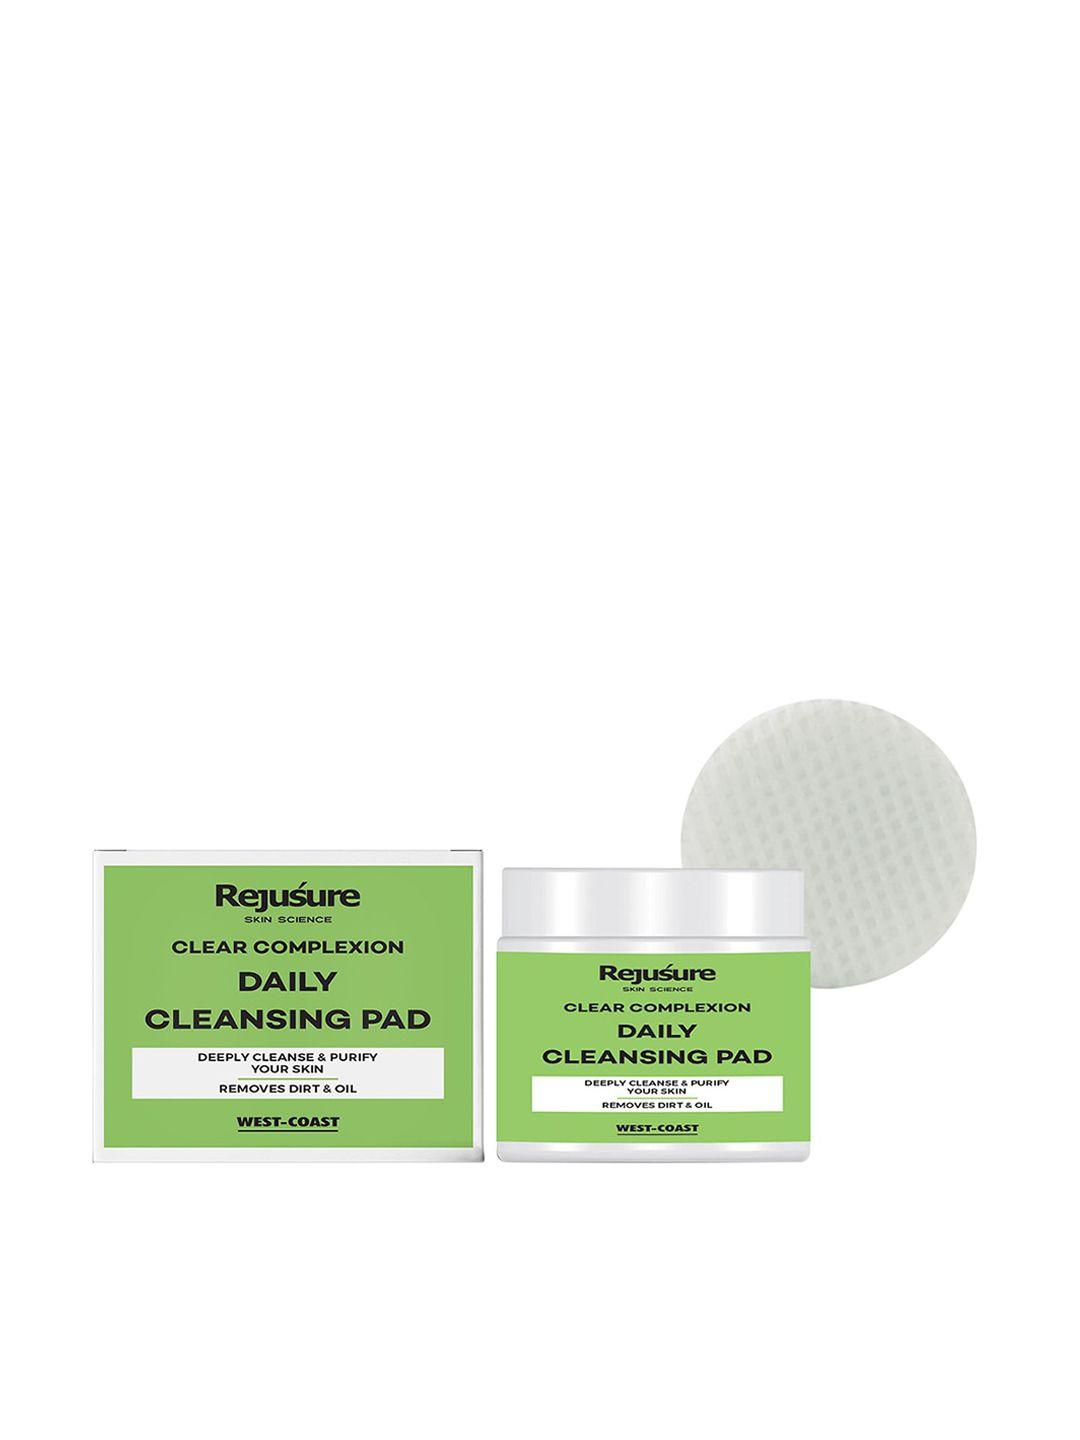 rejusure clear complexion daily cleansing pads to remove dirt & oil - 50 pads